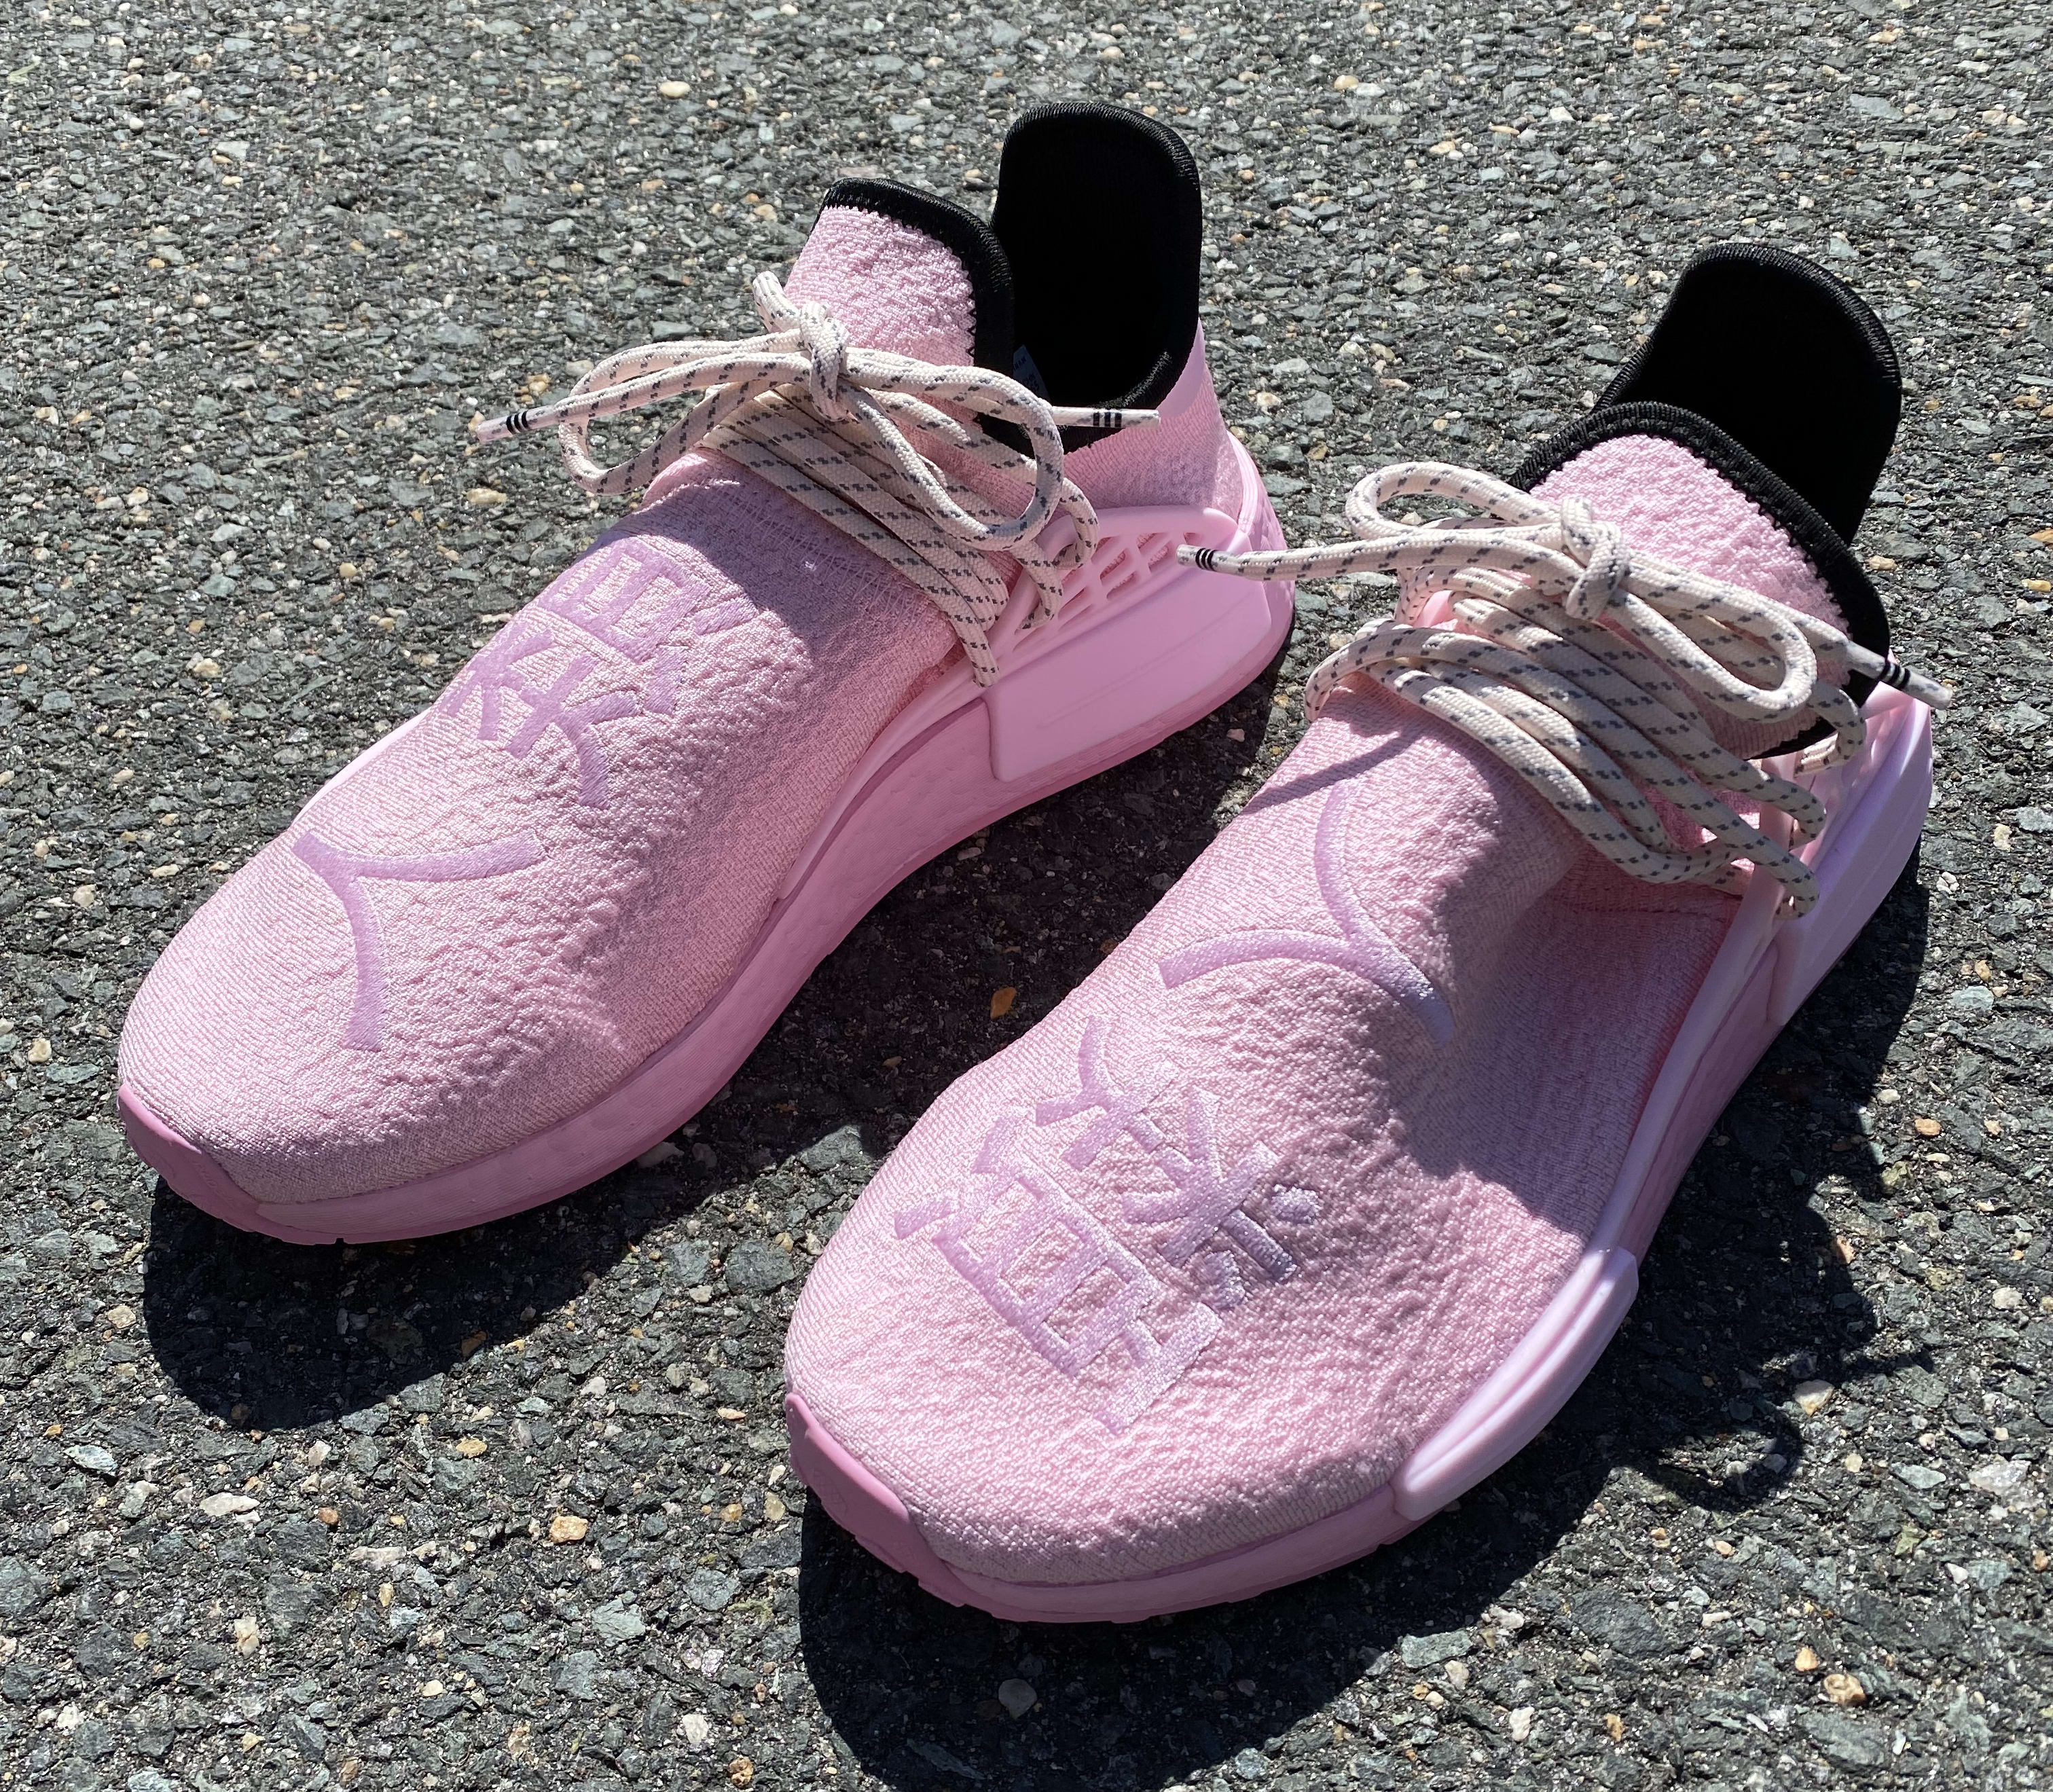 Pharrell Adidas NMD Hu 'Pink' Release Date GY0088 March | Collector